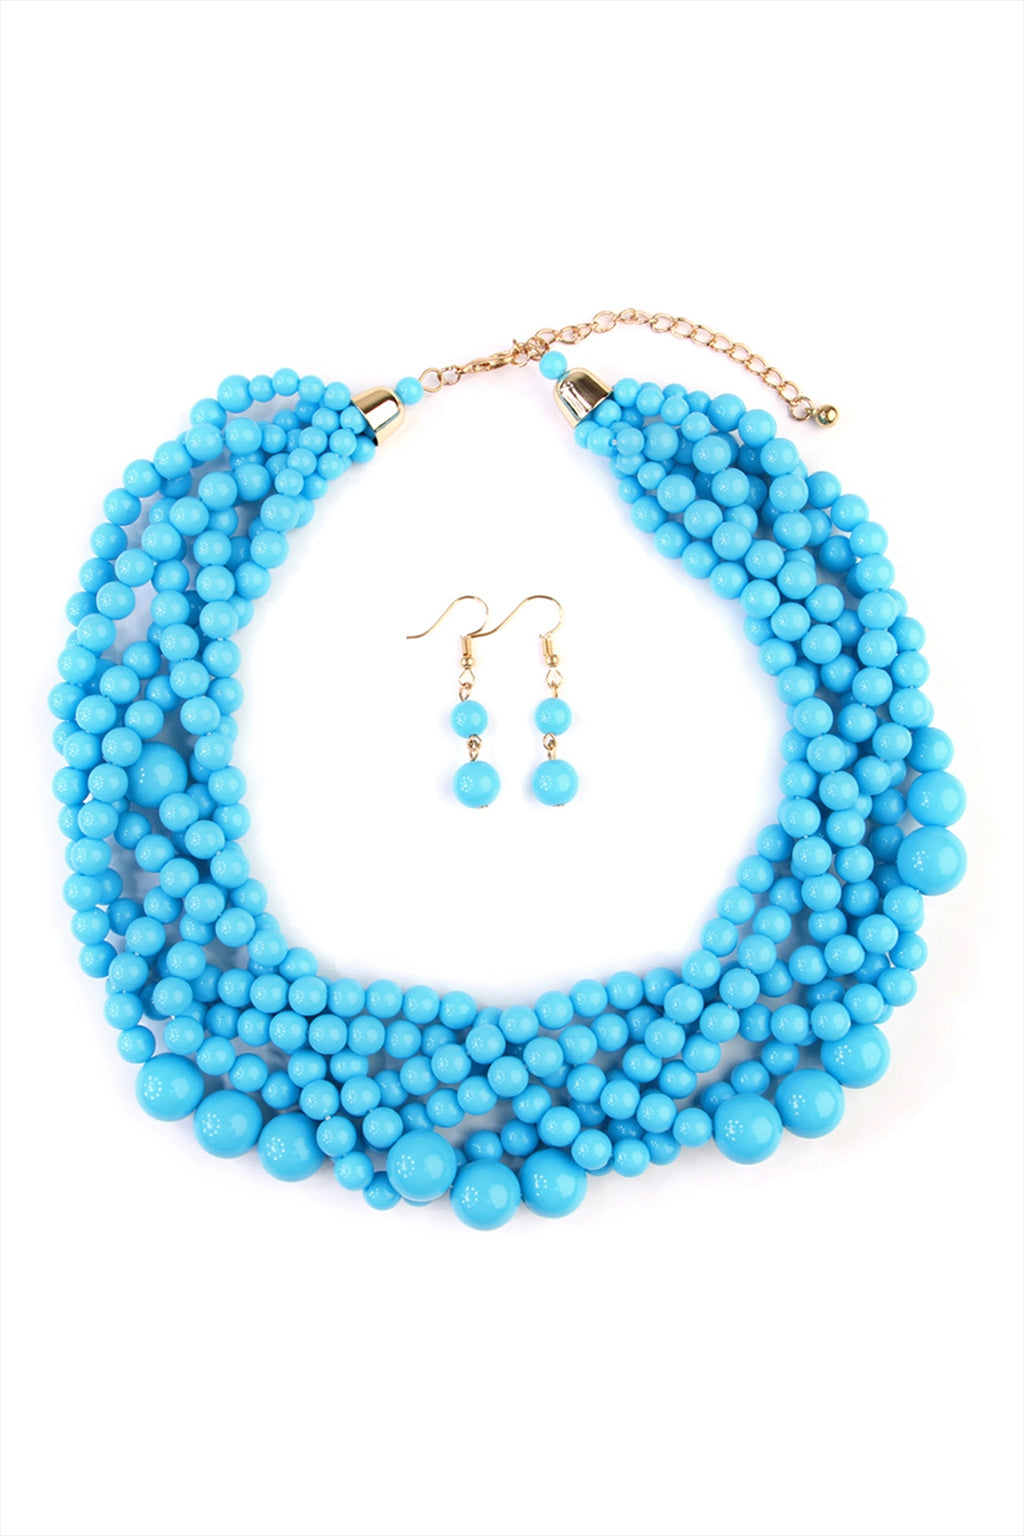 Blue Multi Strand Bubble Choker Necklace And Earring Set - Pack of 6